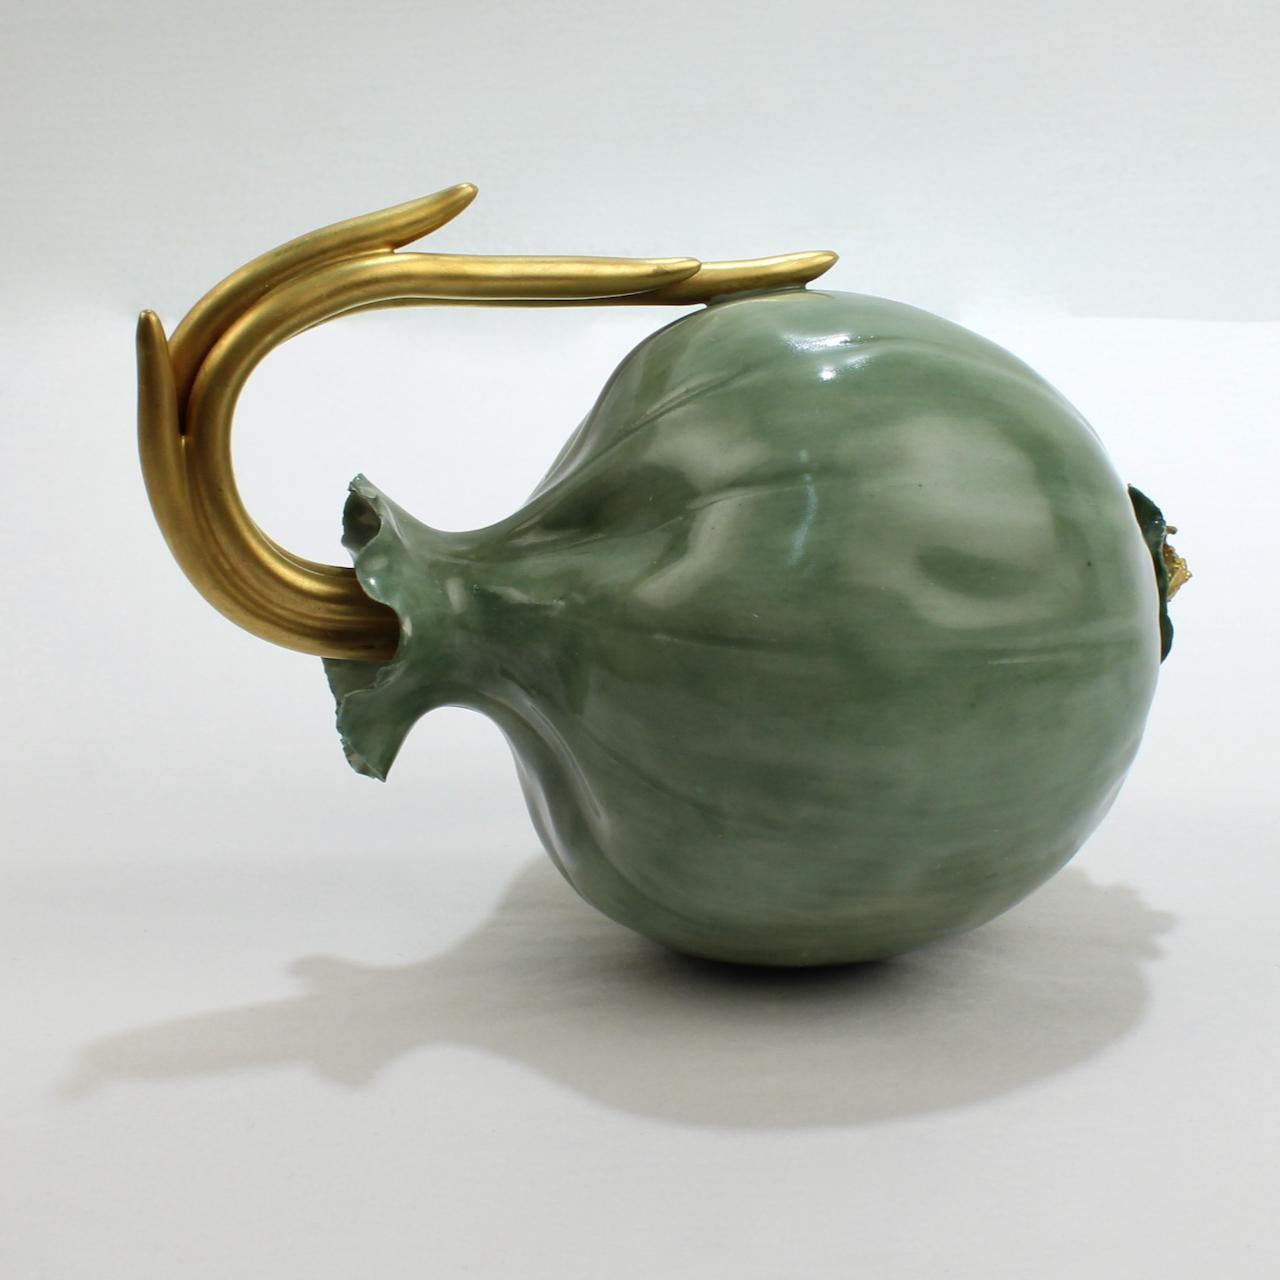 A fine Katherine Houston green onion.

Delicately modeled with a green glazed body and gilt shoots and roots.

From the estate of Susan & John Gutfreund (The 'King of Wall Street').

Date:
2000

Maker:
Katherine Houston

Marks: 
KHO '00